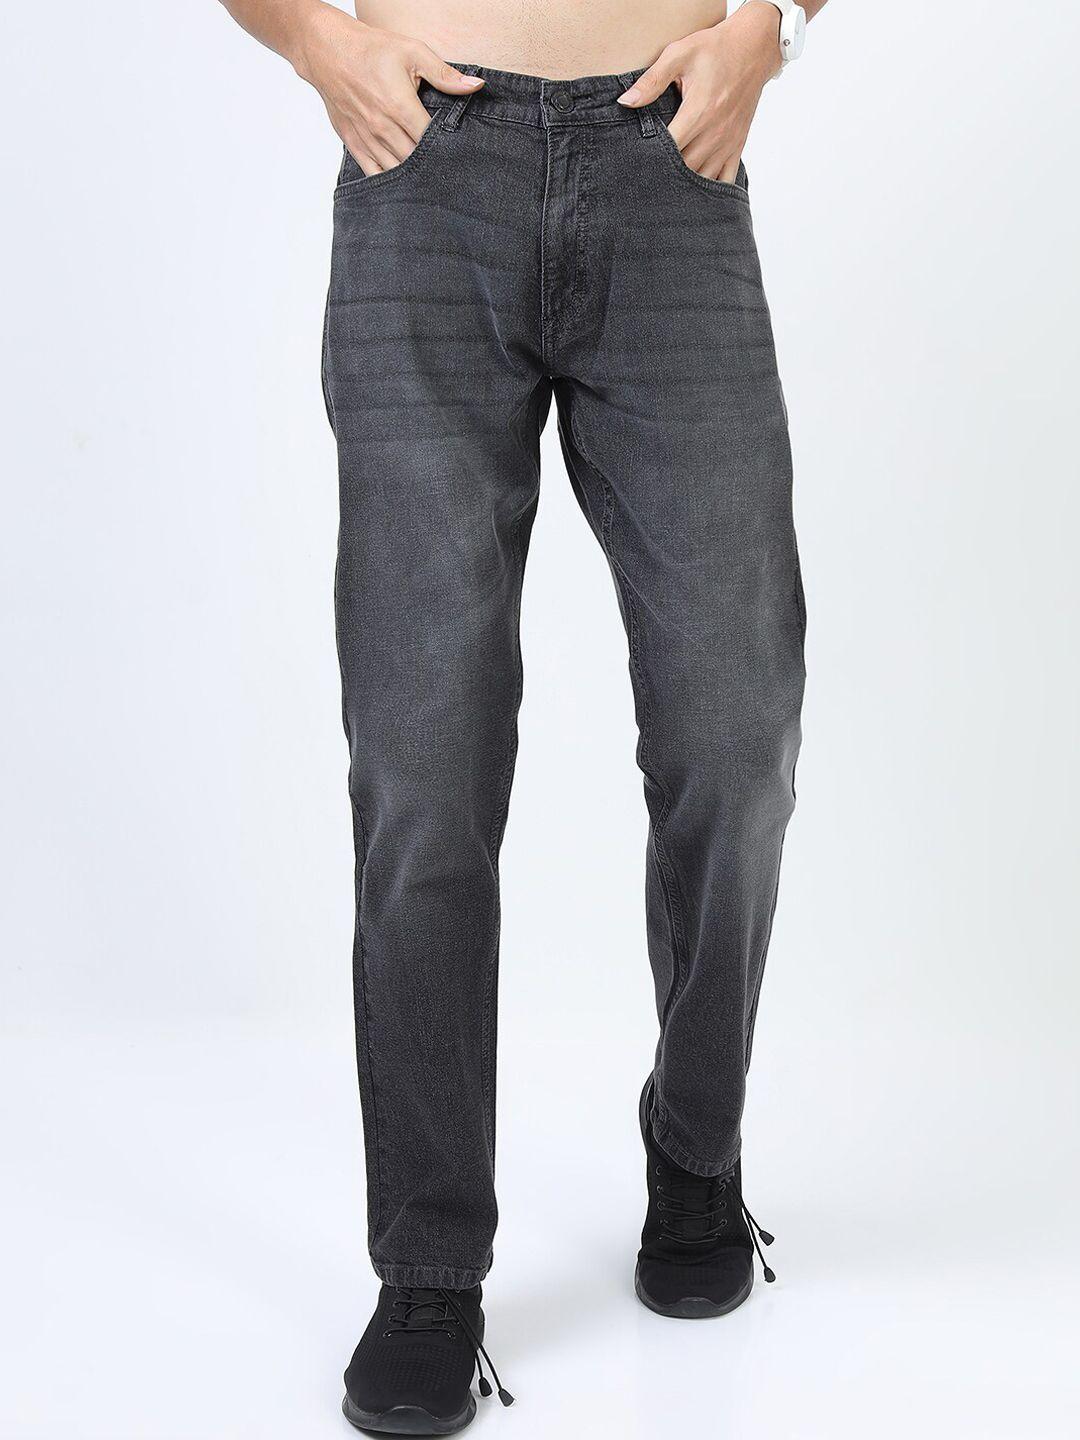 highlander--men-charcoal-straight-fit-clean-look-stretchable-jeans